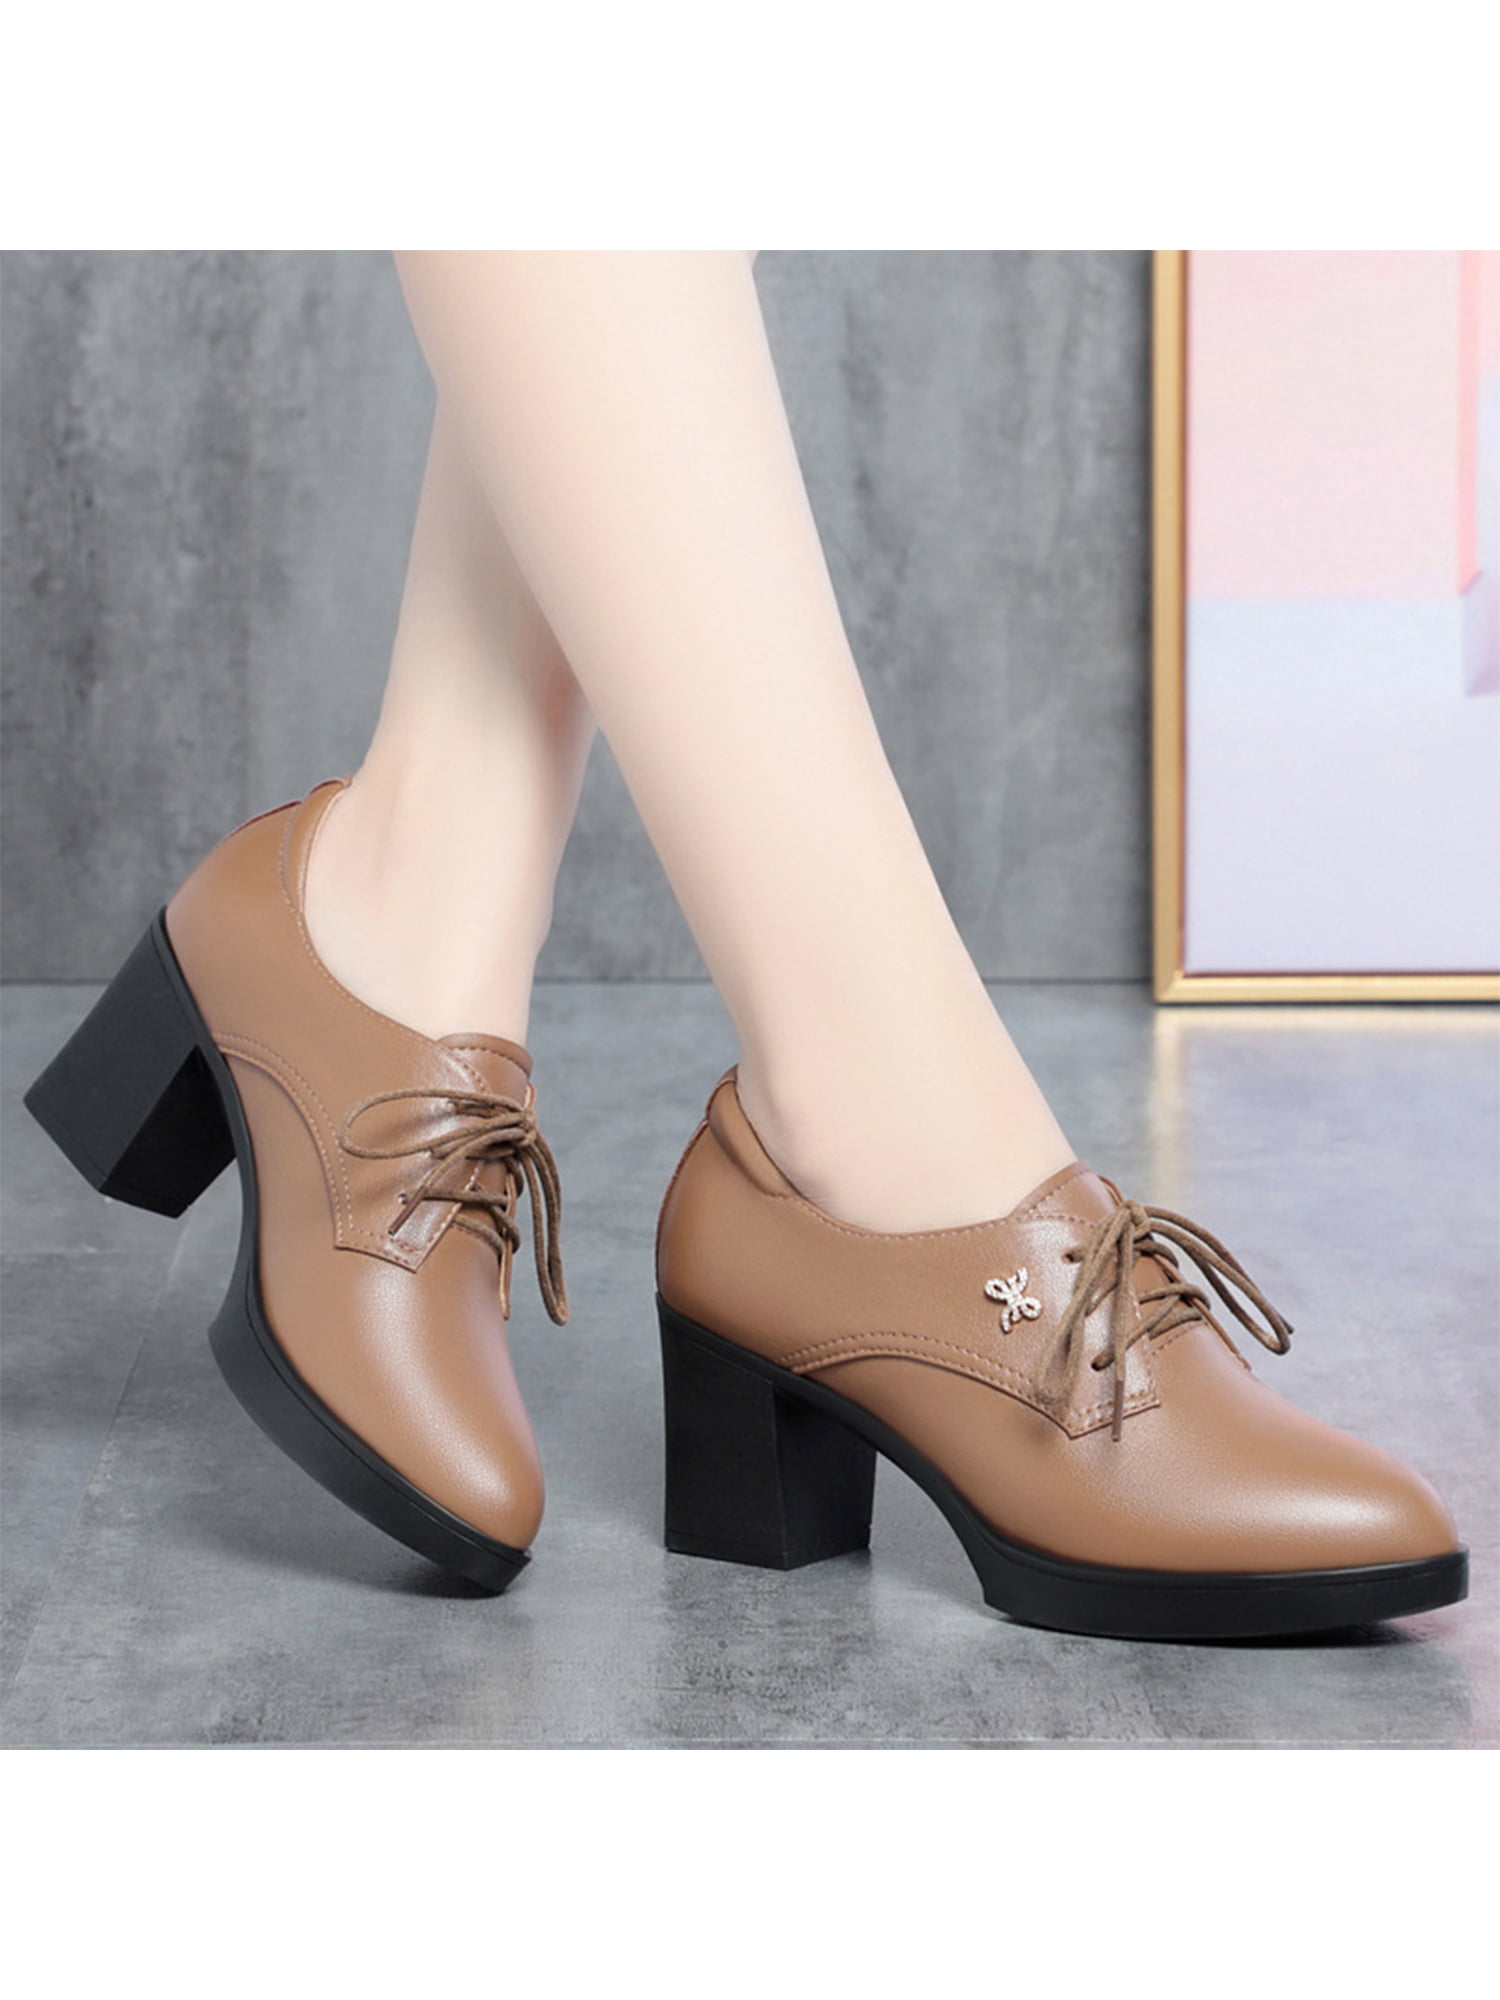 Stylish 2022 Spring Womens Oxford Chunky Shoes With Platform, High Heels,  And Lace Up Closure Square Heeled Casual Pumps And Bare Boots Style #9481N  From Hangzhoukk, $22.84 | DHgate.Com